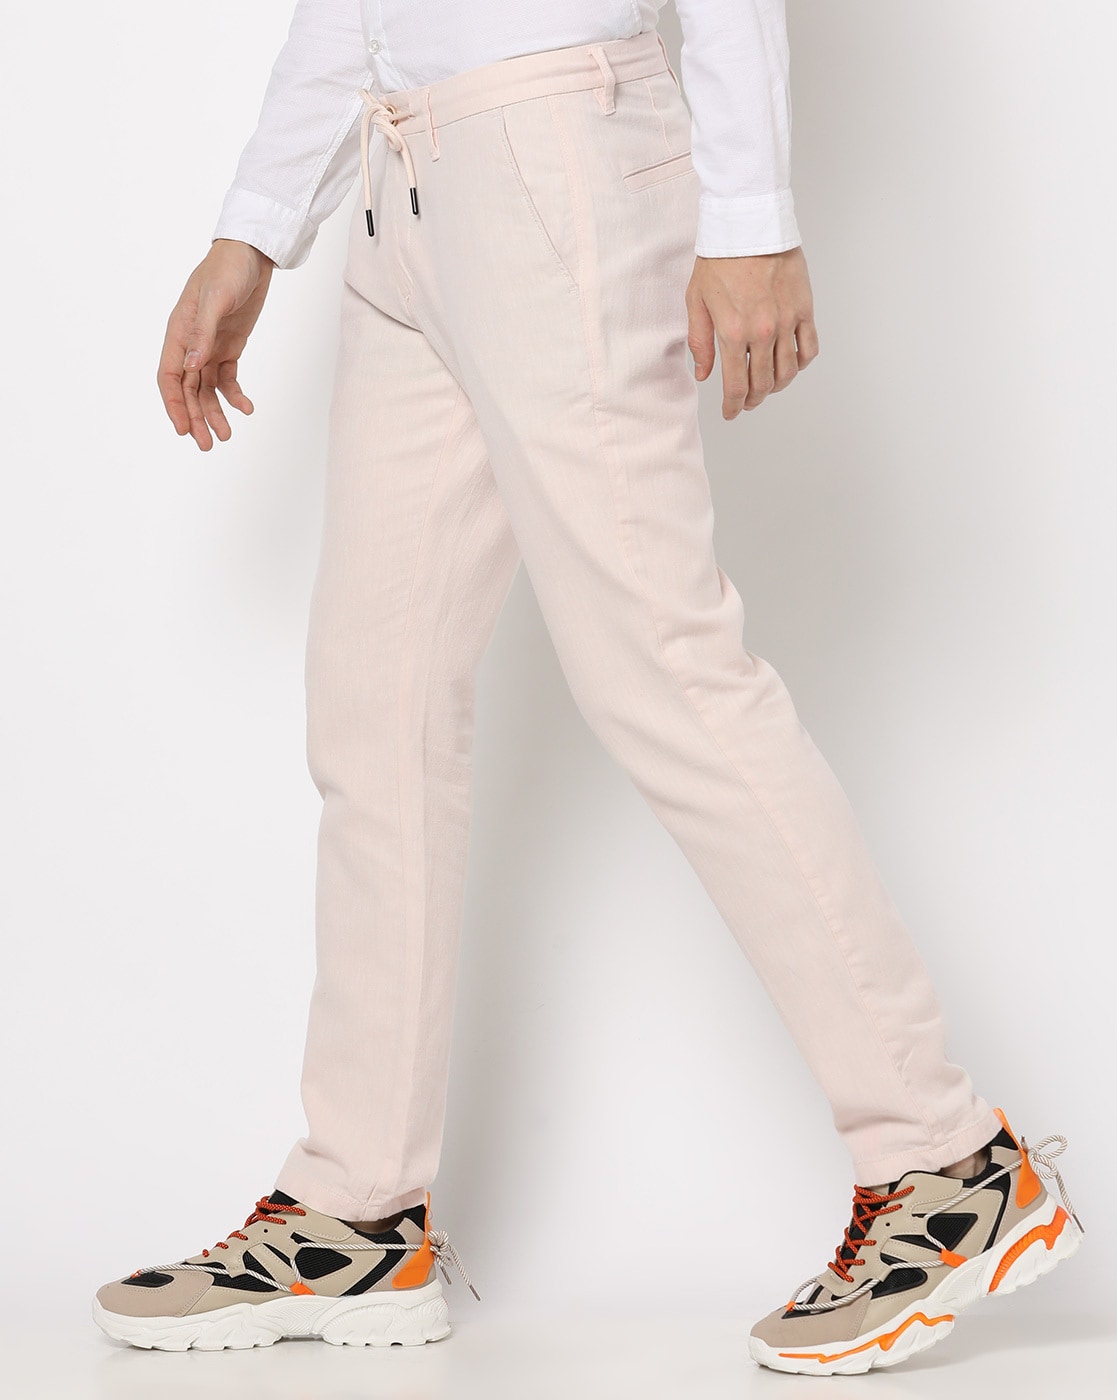 John Players Relaxed Men Grey Trousers - Buy John Players Relaxed Men Grey  Trousers Online at Best Prices in India | Flipkart.com